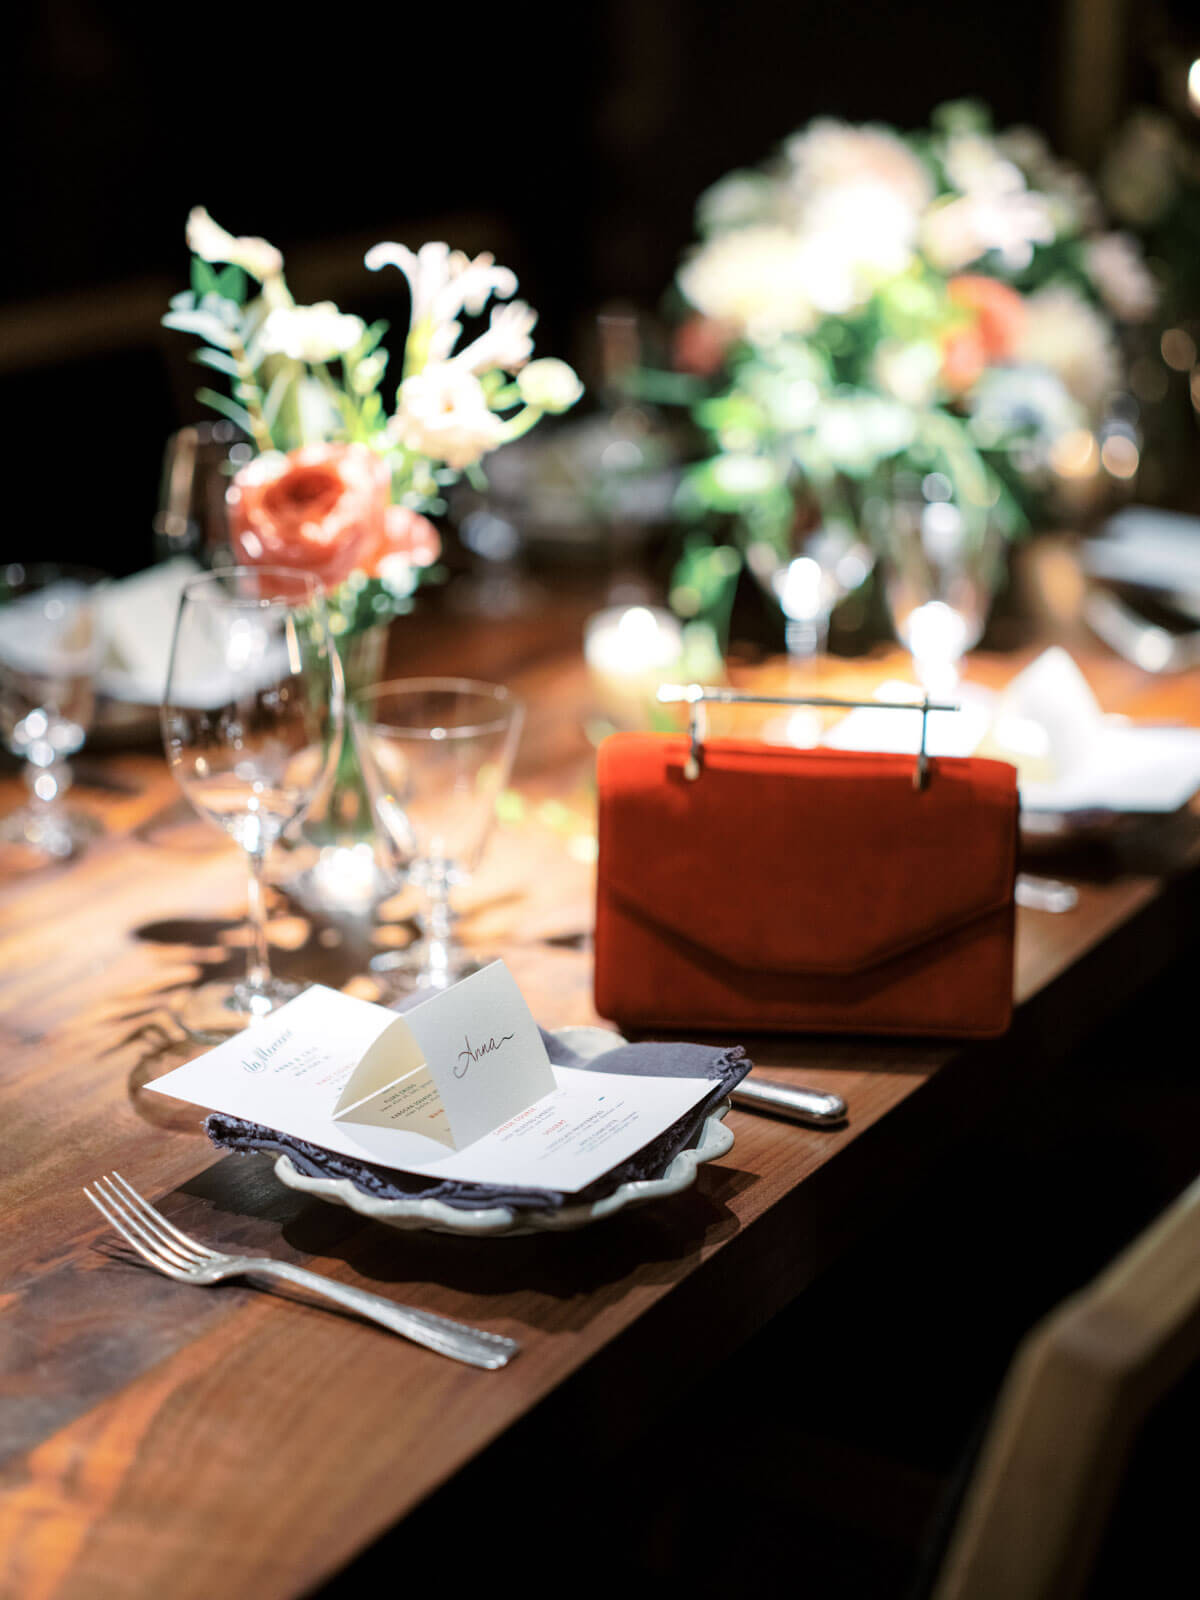 The bride's red purse is on the elegant dining table. Image by Jenny Fu Studio